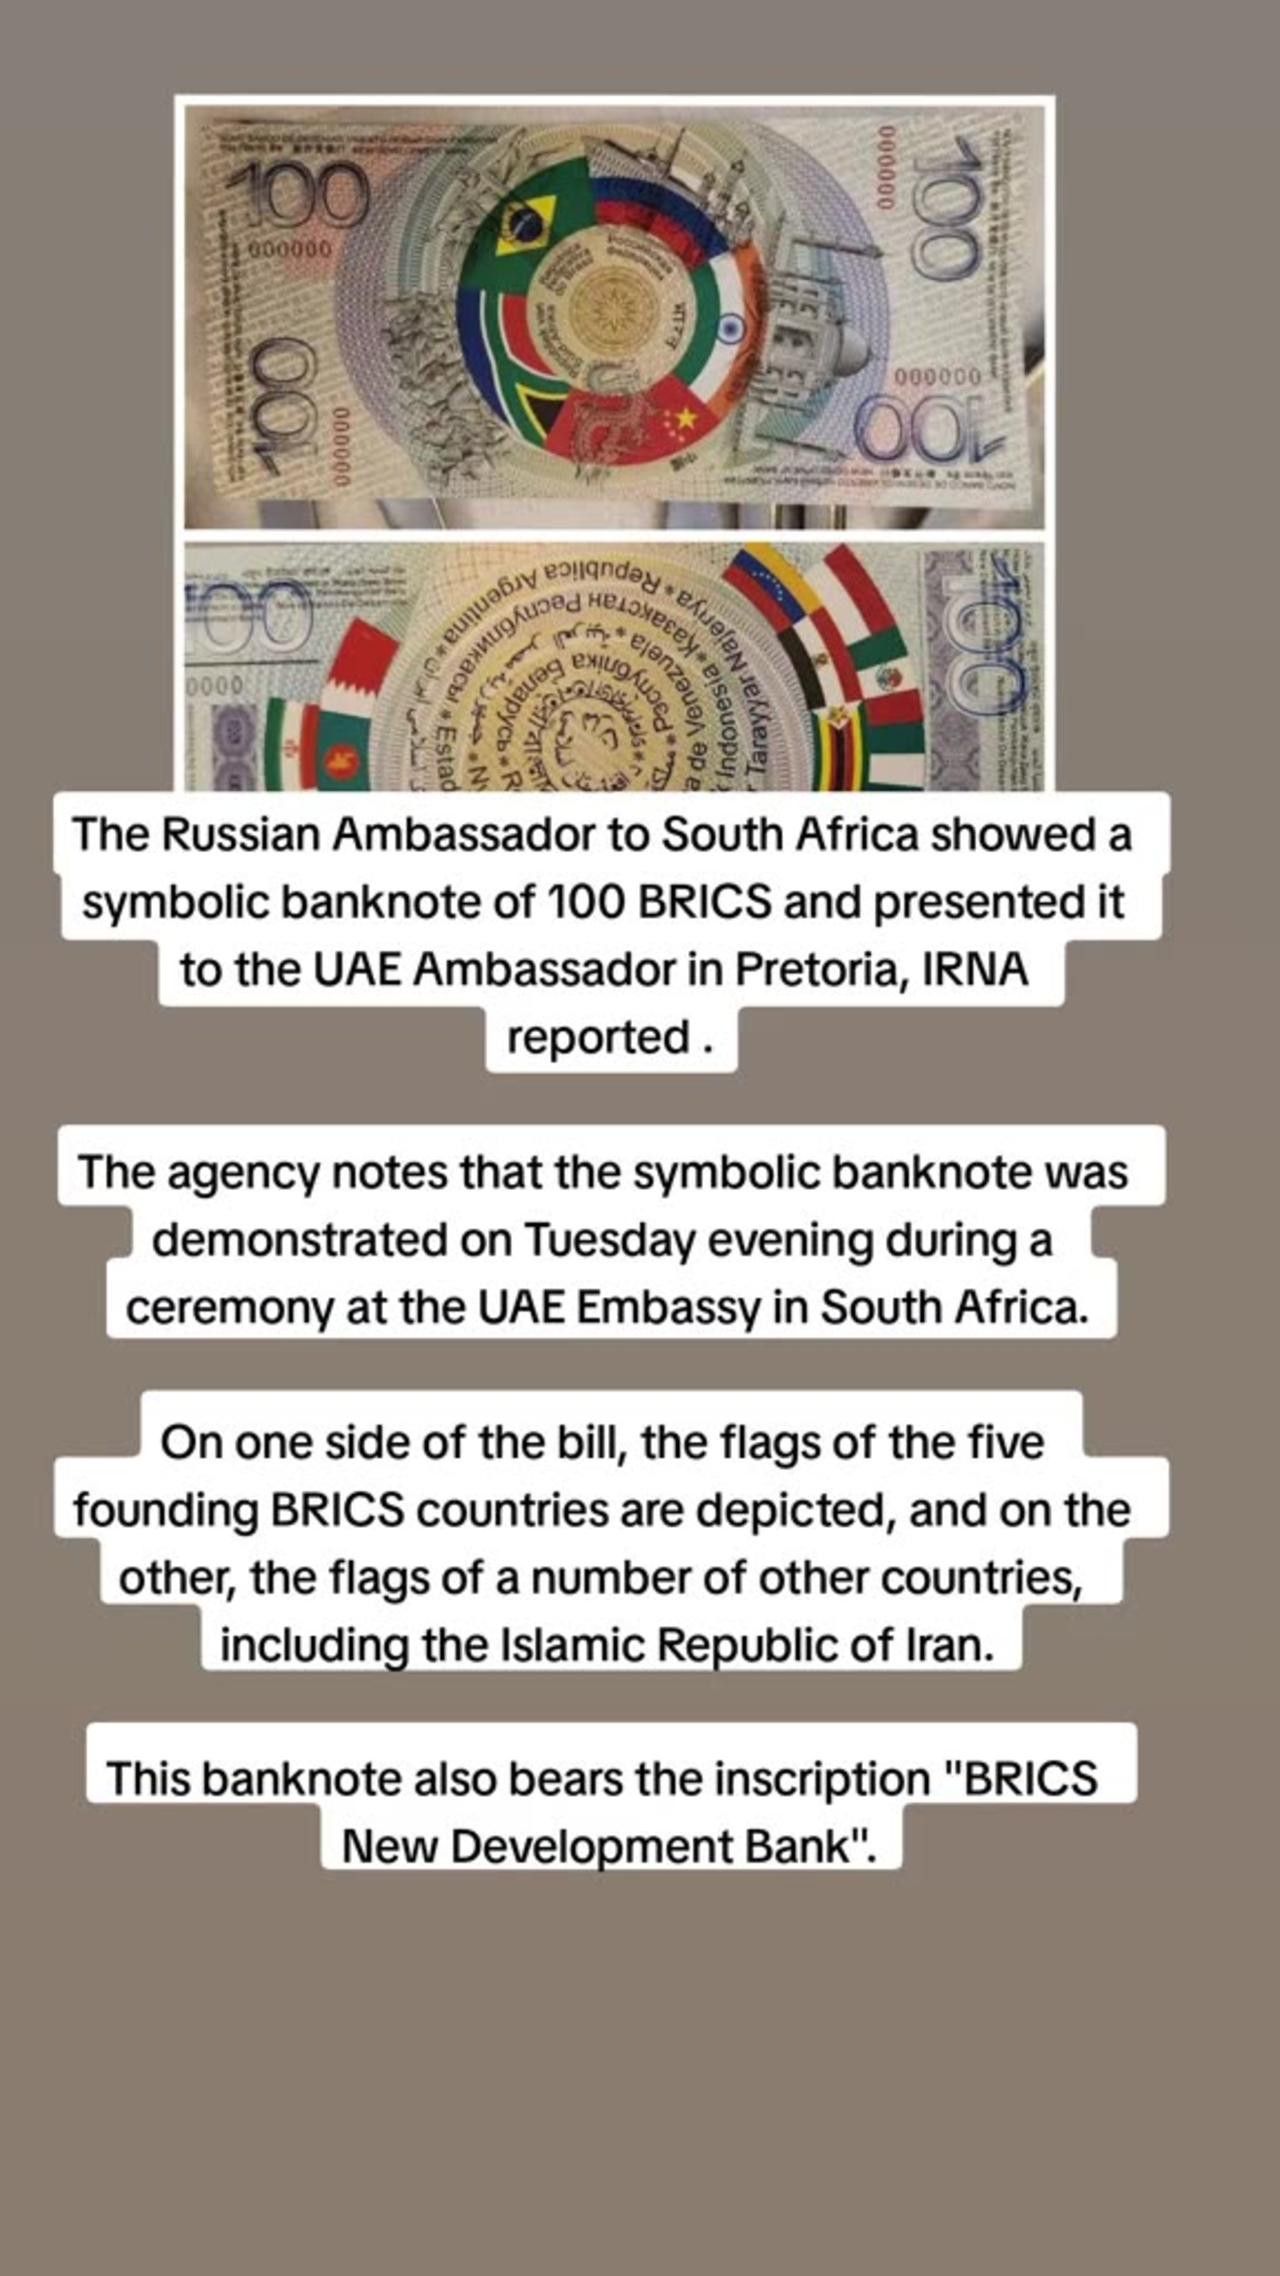 The #Russian Ambassador to #SouthAfrica showed a symbolic banknote of 100 BRICS